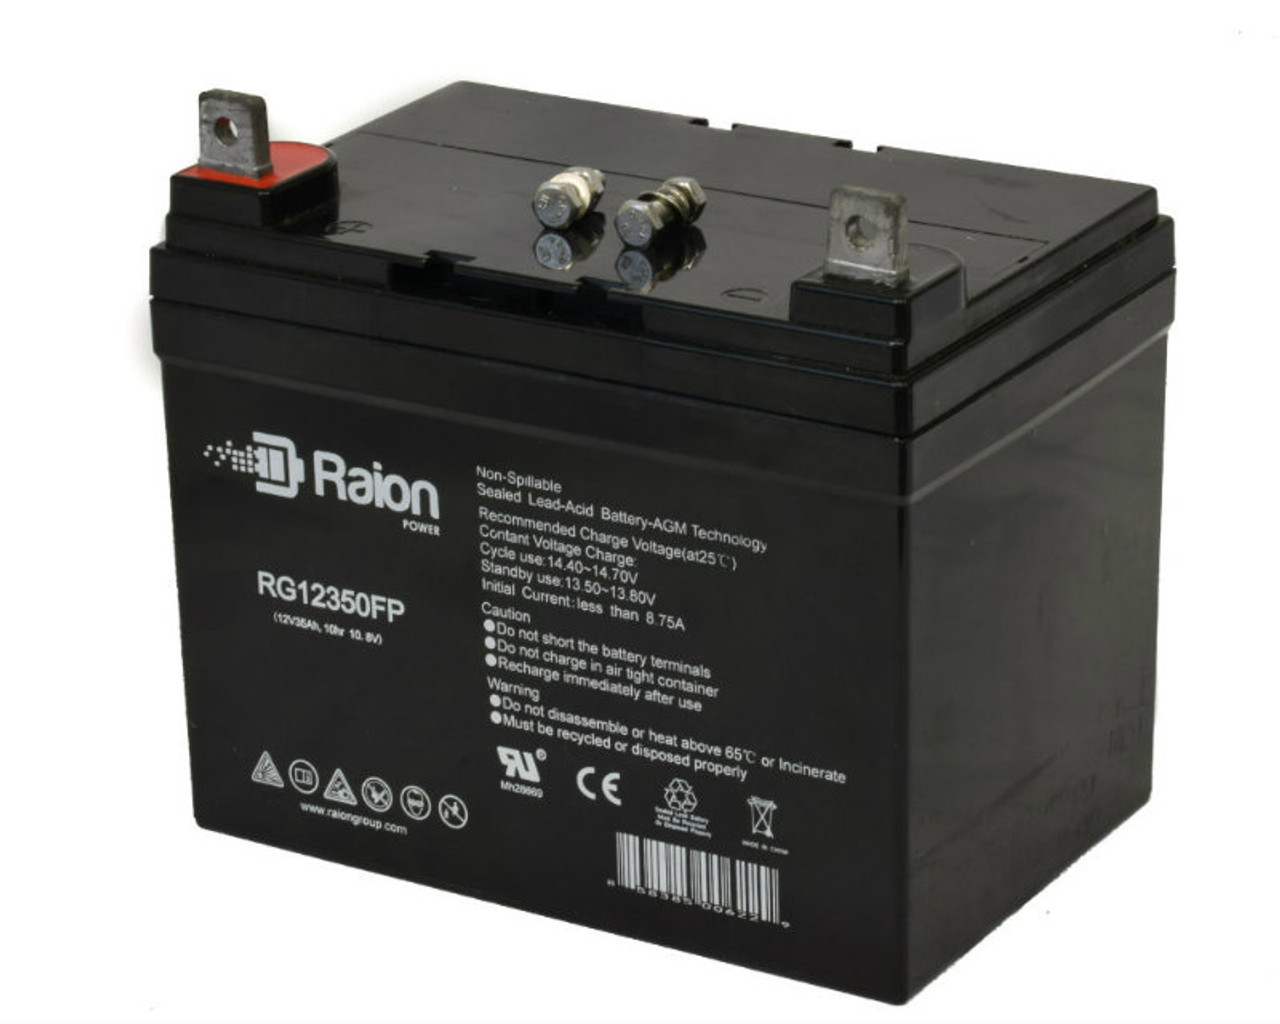 Raion Power Replacement 12V 35Ah RG12350FP Mobility Scooter Battery for Golden Technology AGM1248T